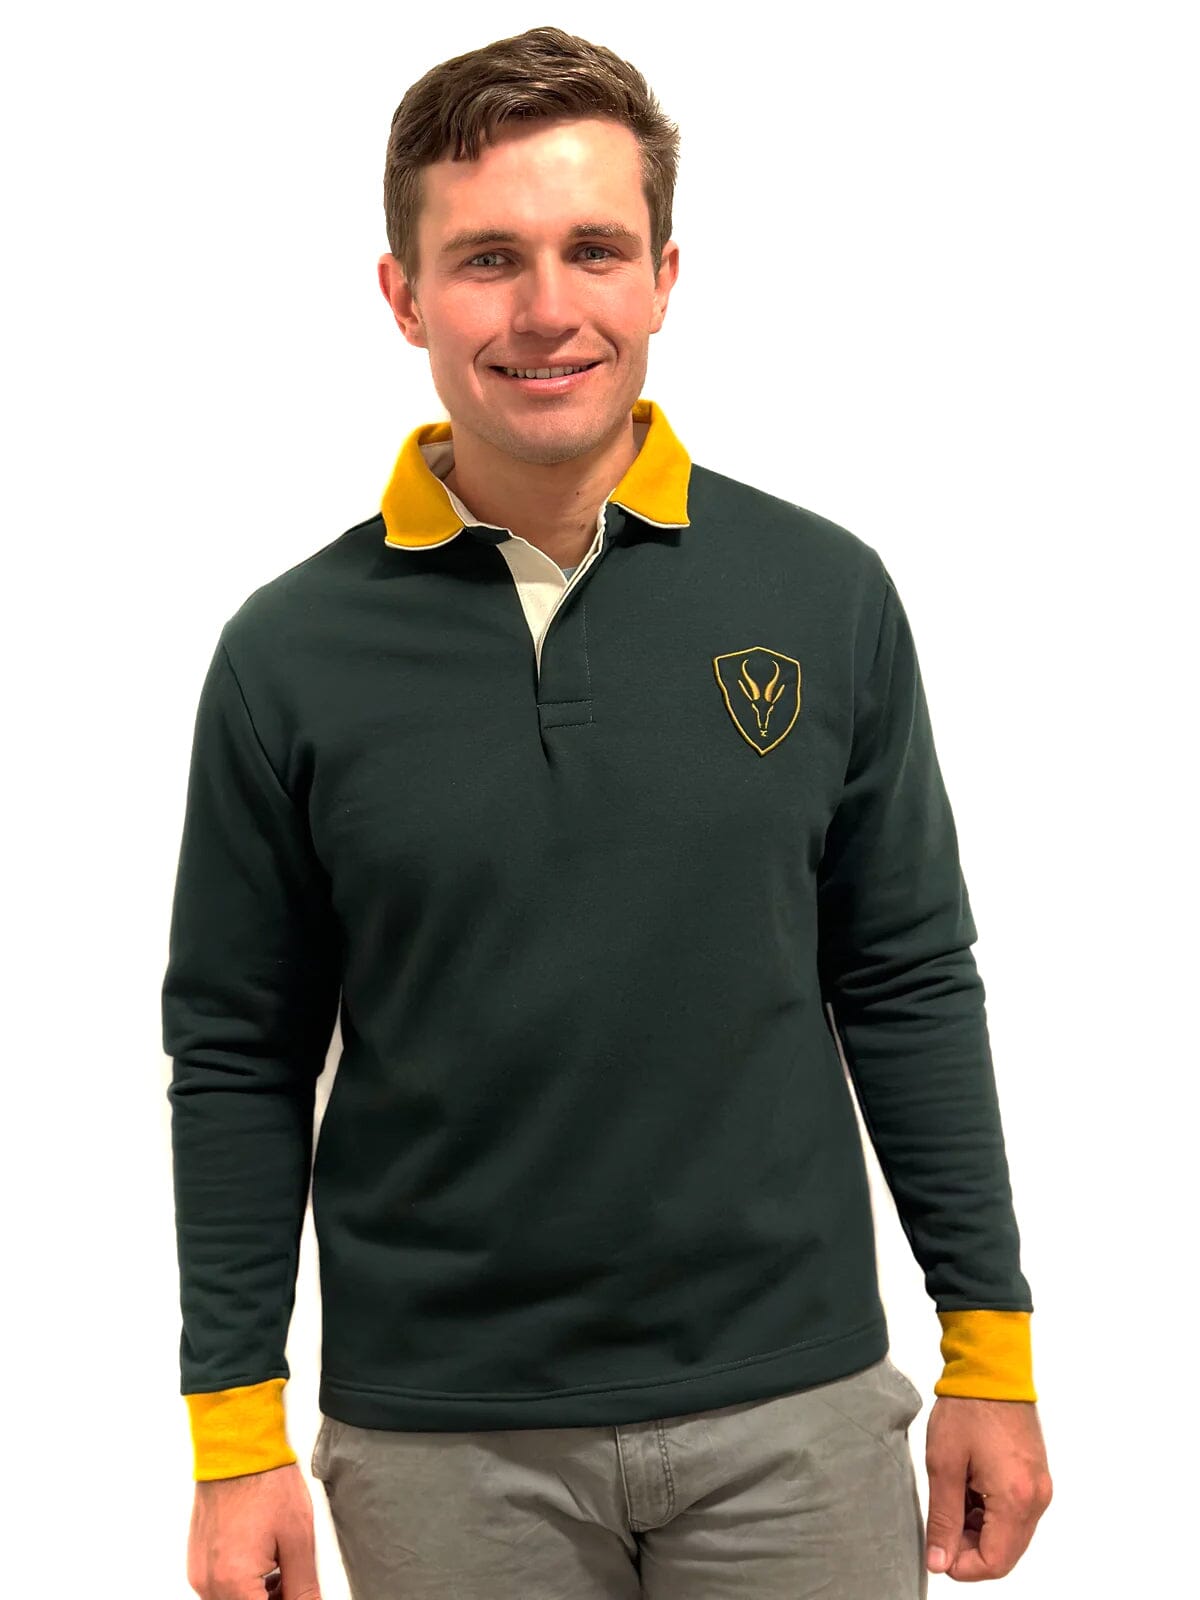 Made by Artisans South African Men's Golfer Tops Made by Artisans 